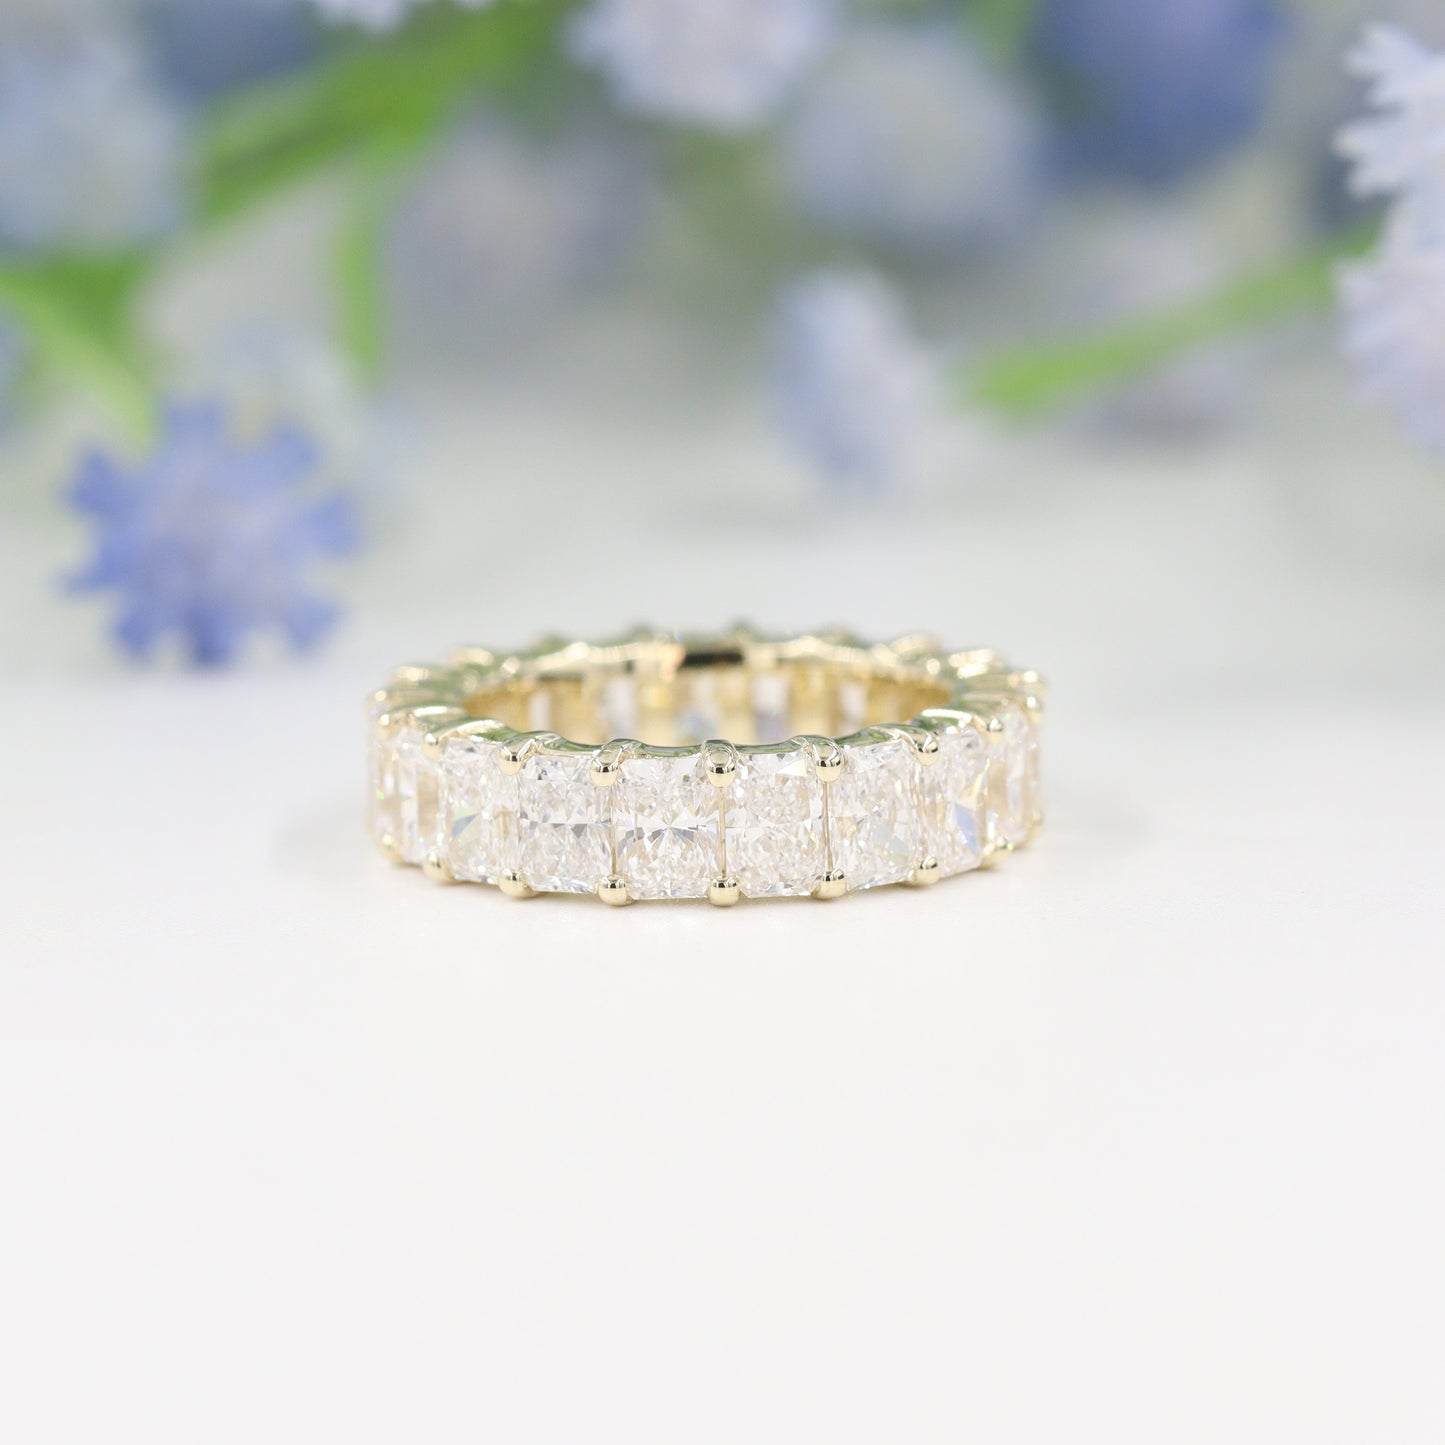 5ct Radiant Cut Diamond Full Eternity Wedding Band/Stackable Radiant Cut Lab Grown Diamond Band/Anniversary Ring/Stackable Diamond Ring